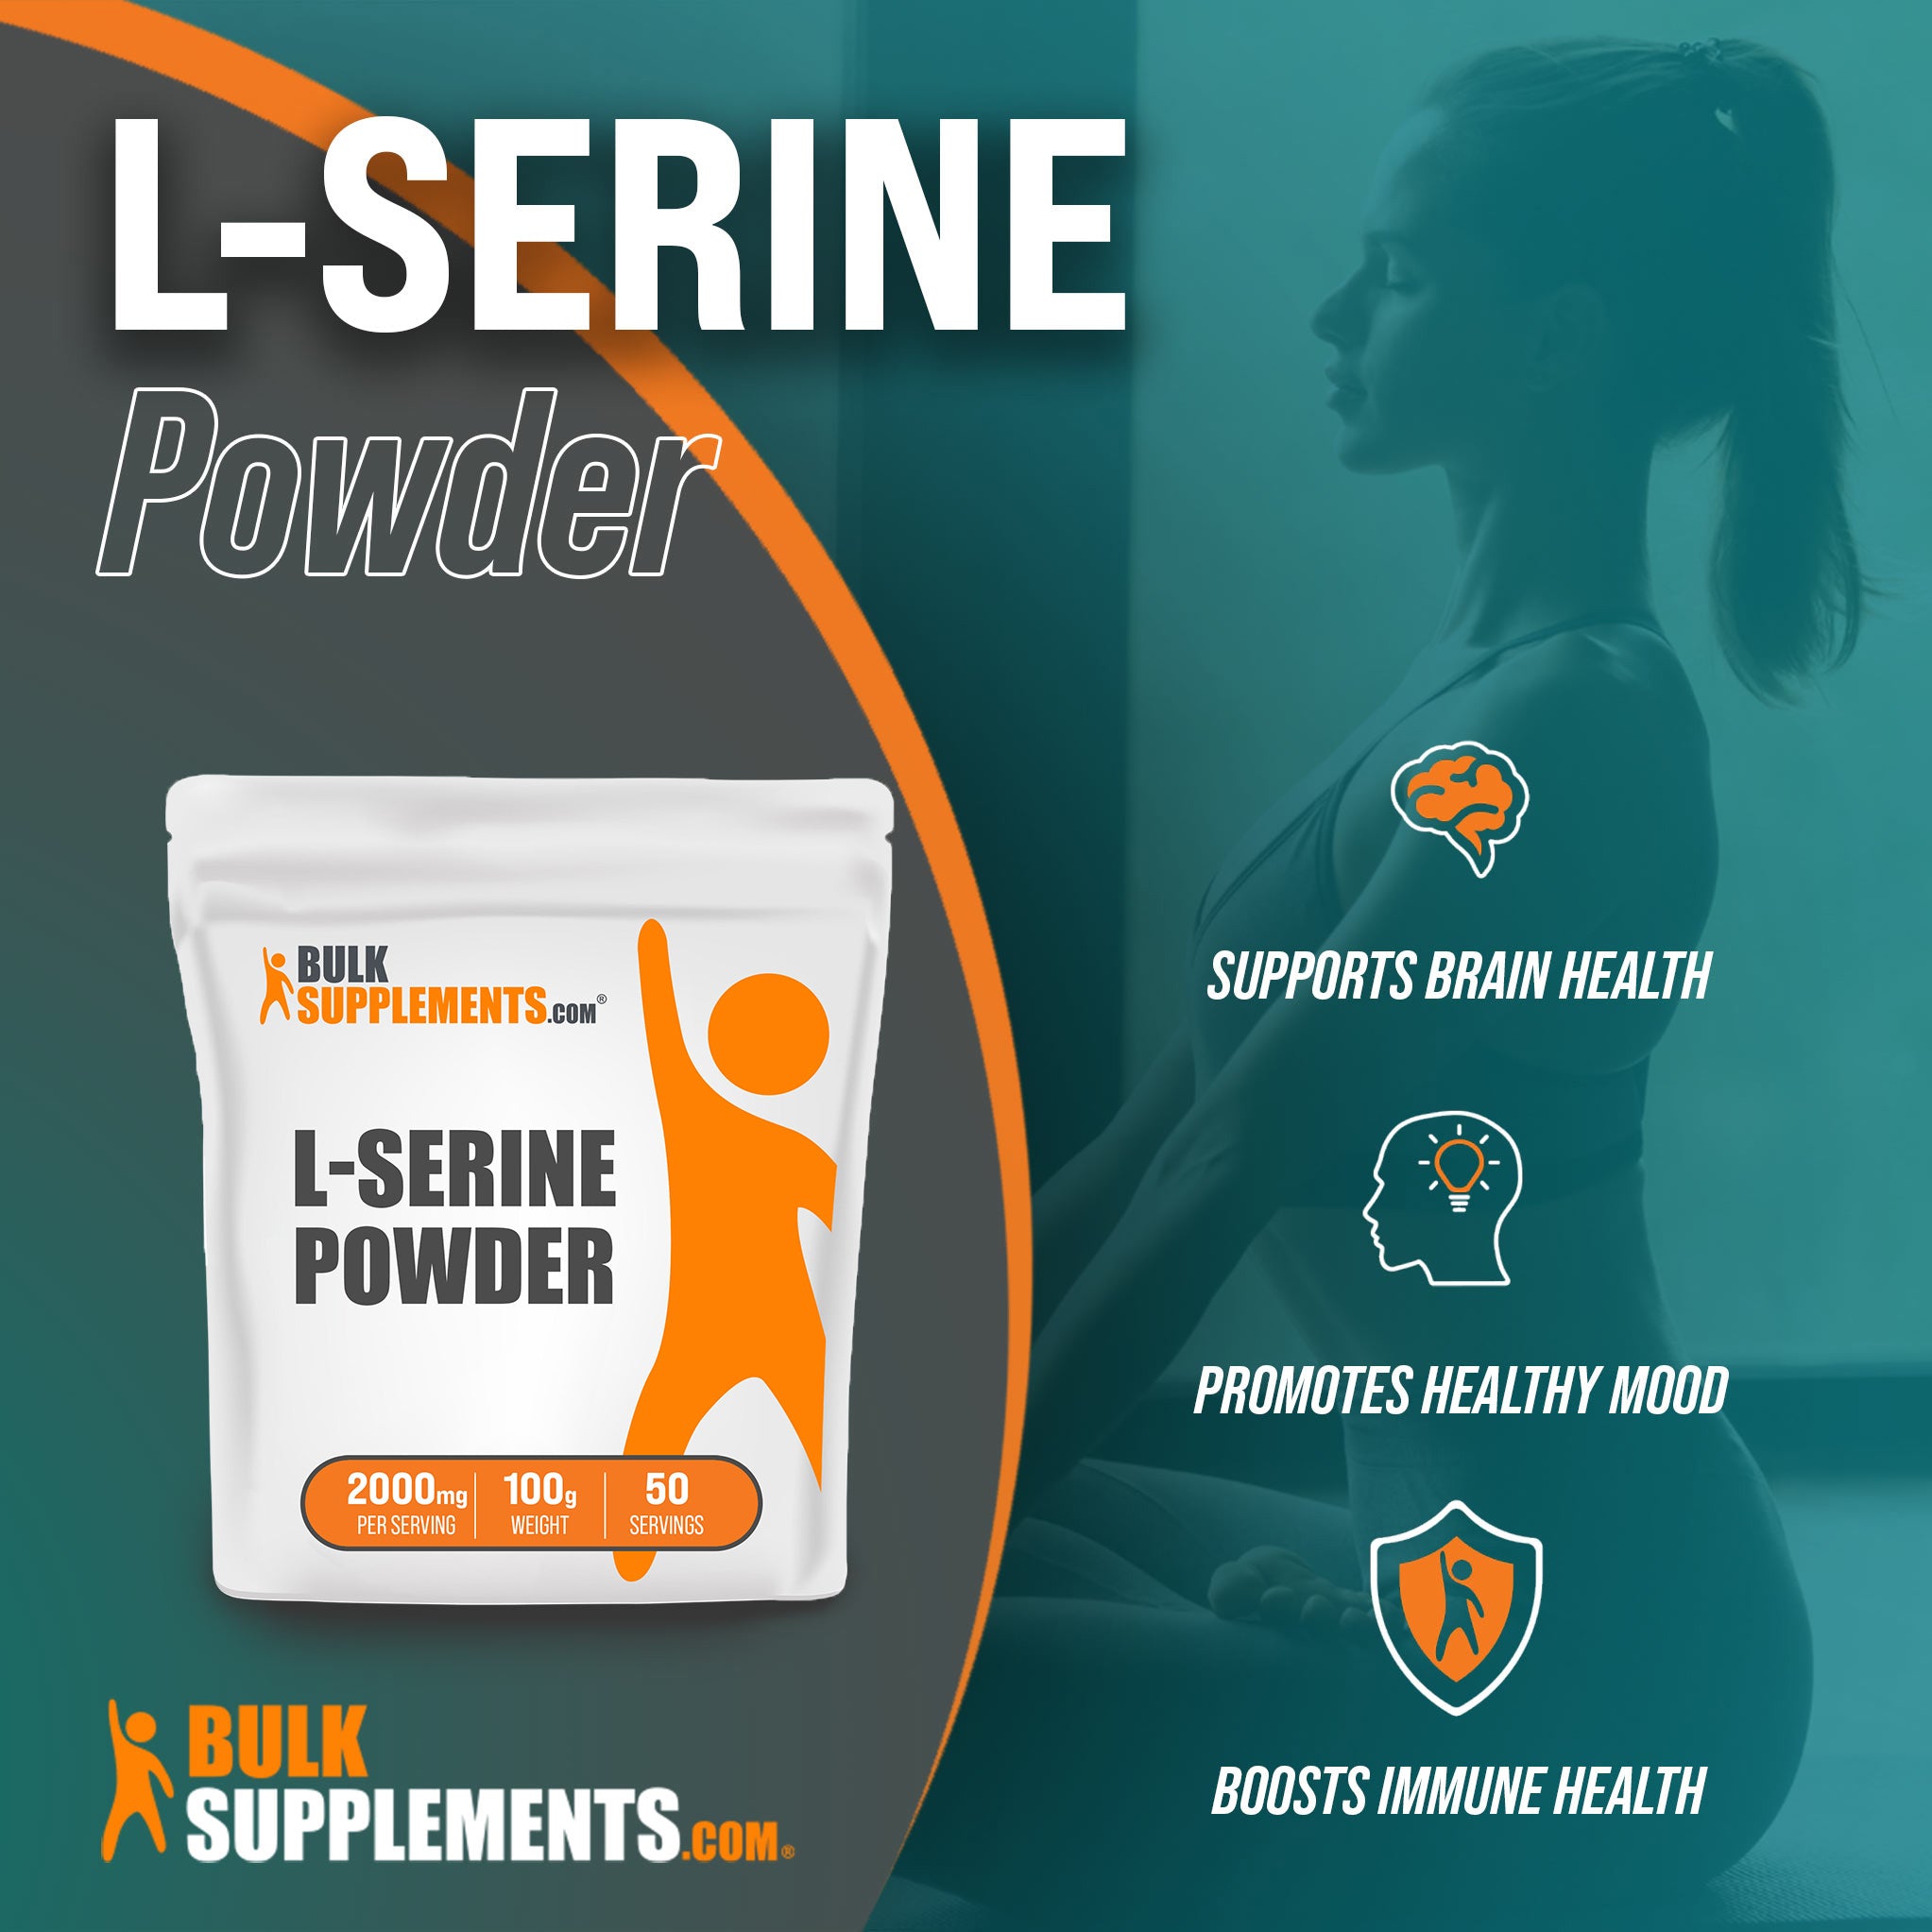 Benefits of L-Serine: supports brain health, promotes healthy mood, boosts immune health